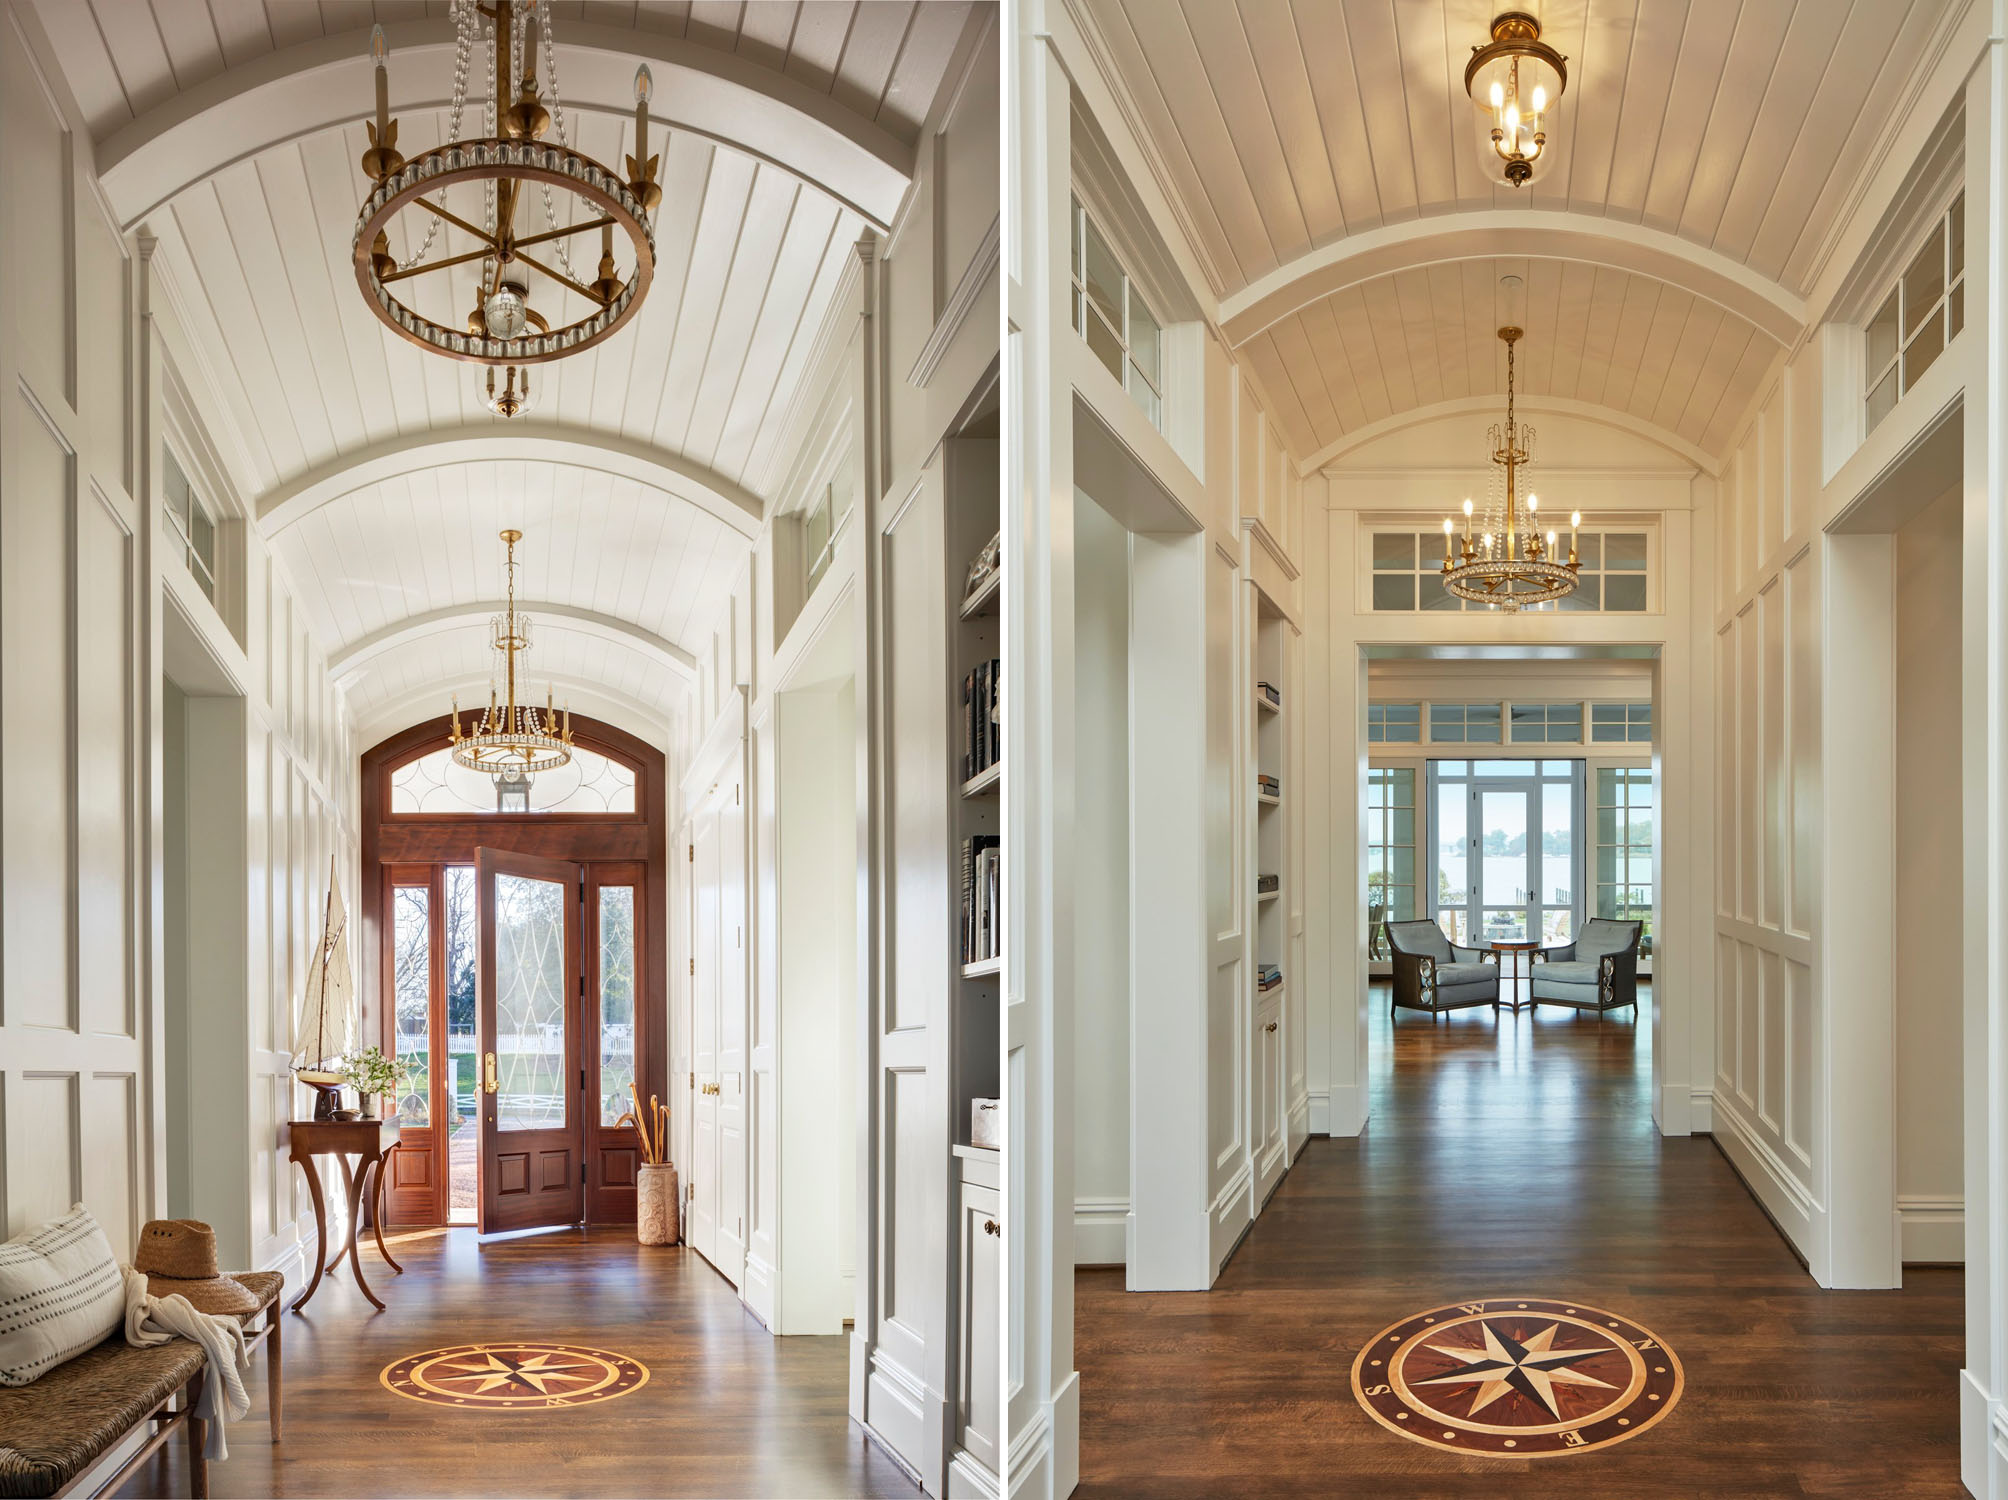 Hallway with Curved Beadboard Ceilings and Handcrafted Compass Inlay on Hardwood Floor